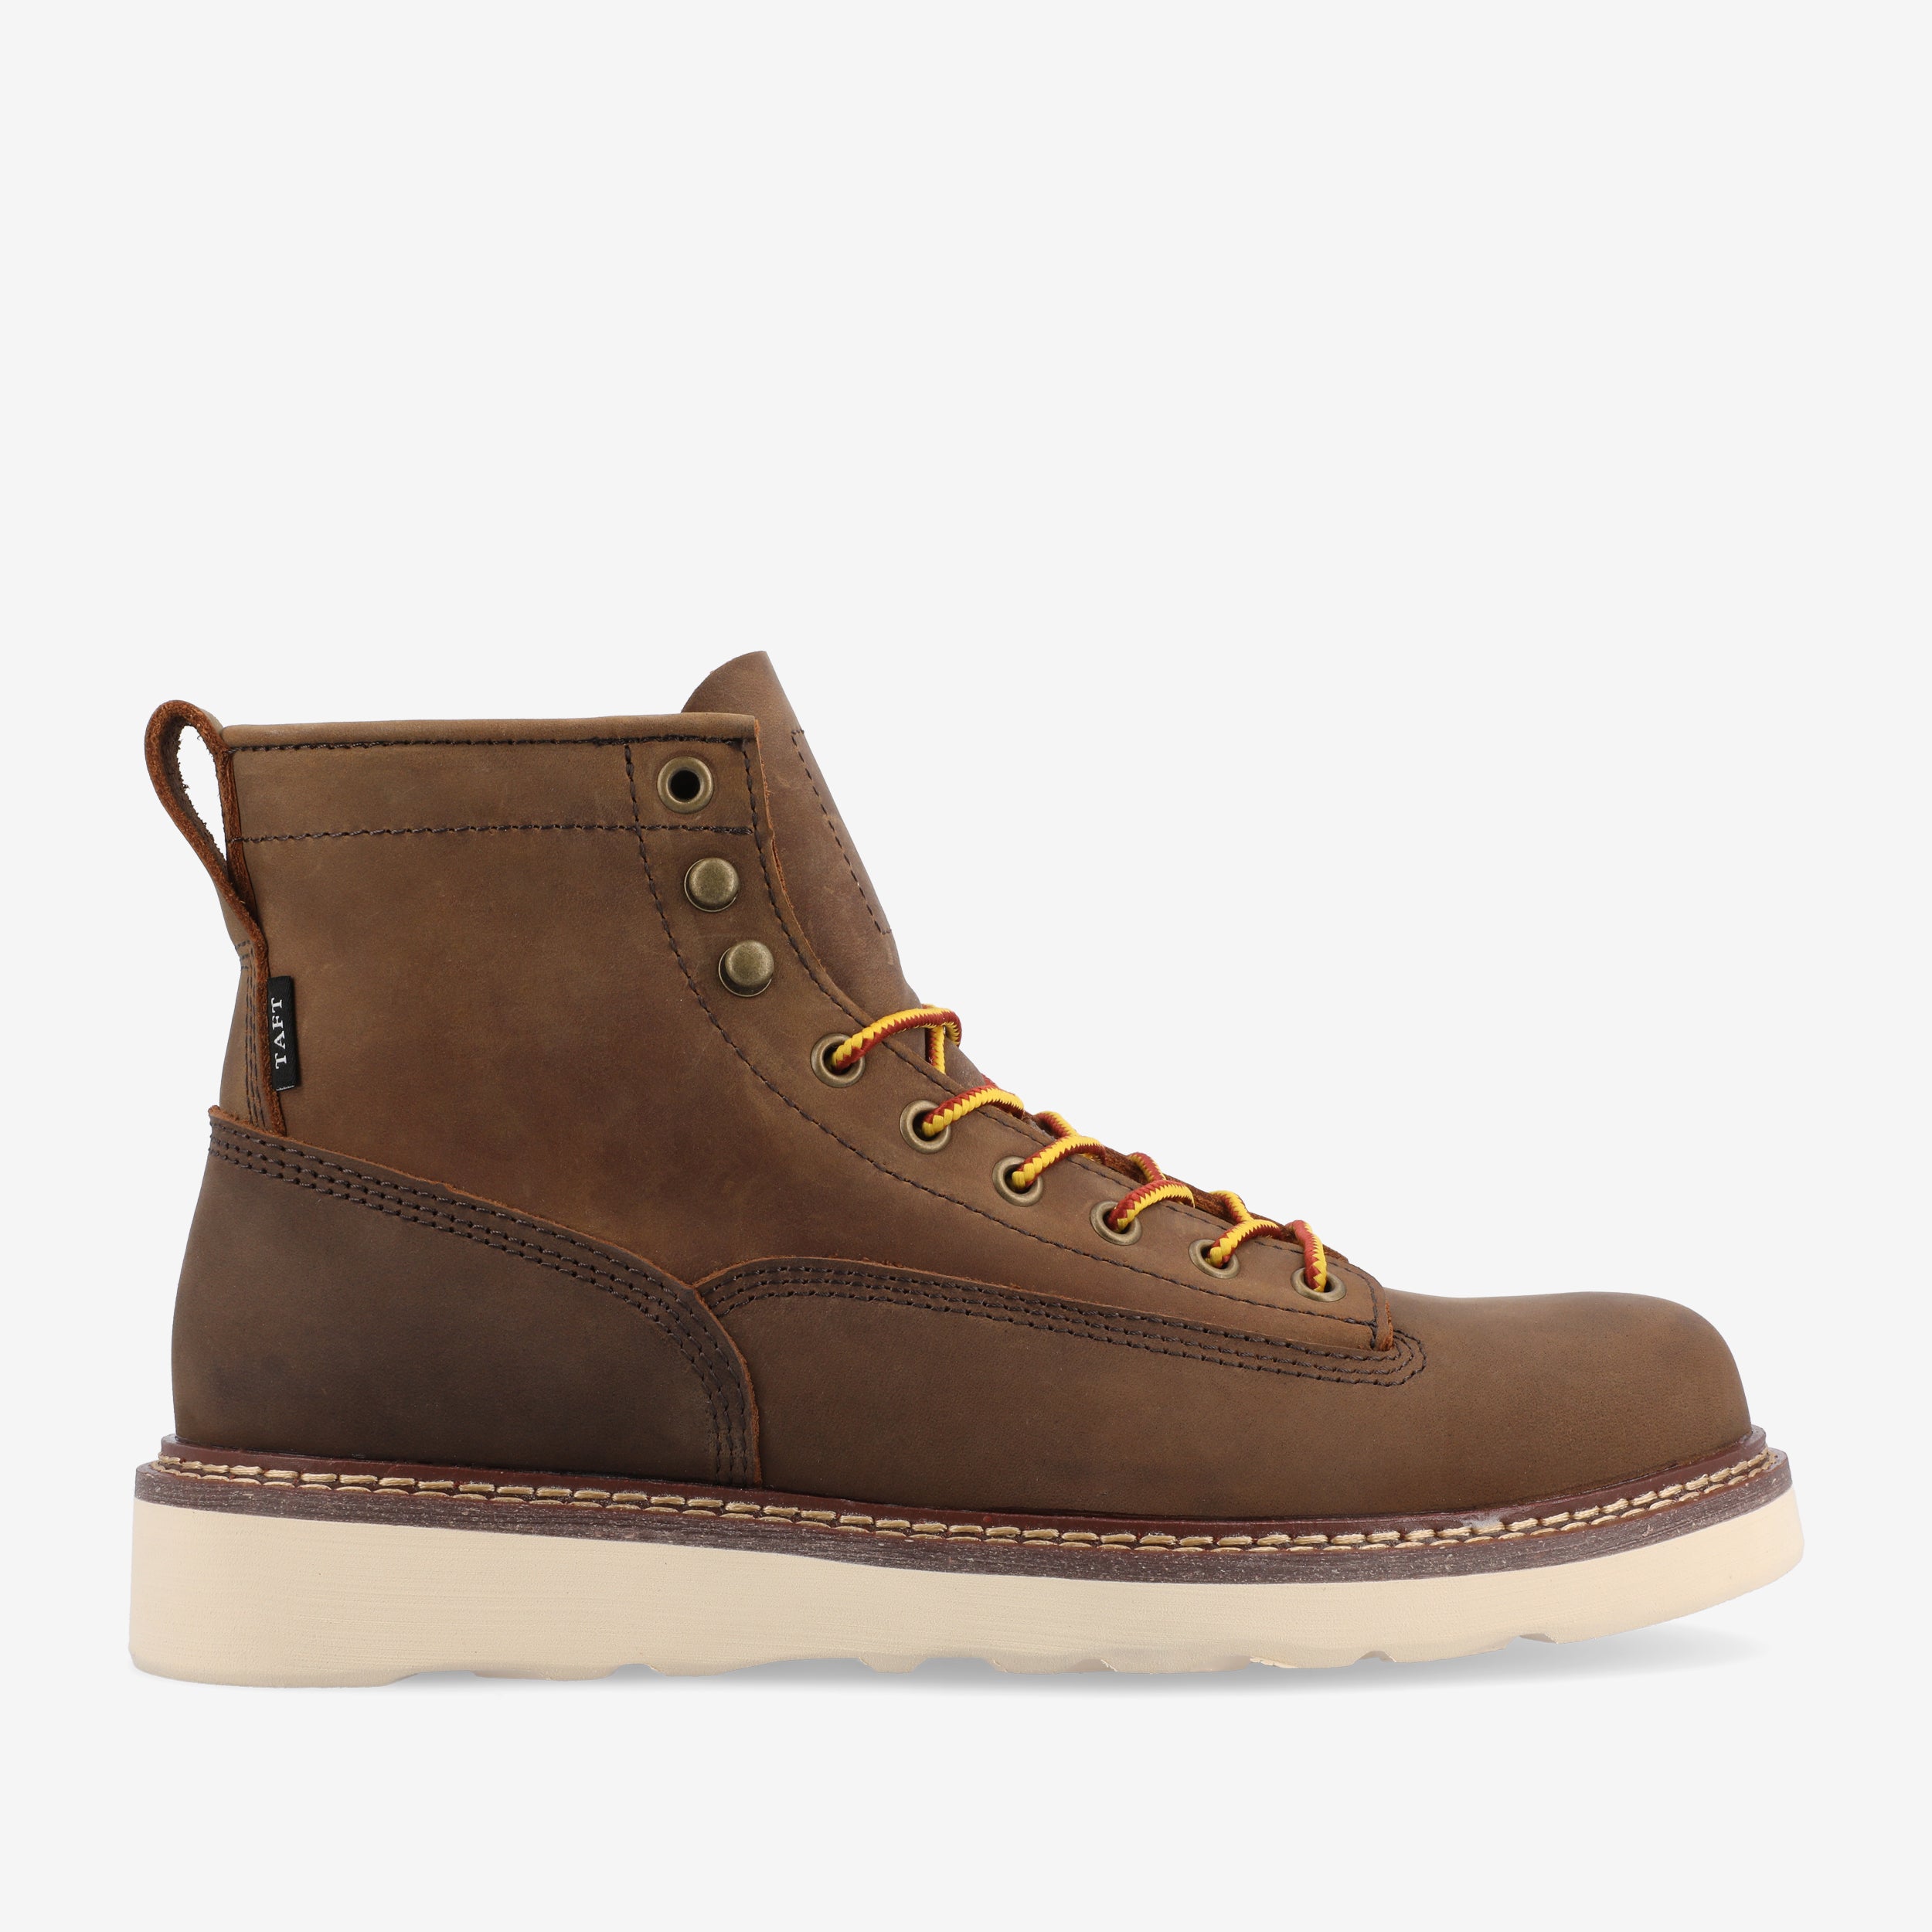 Model 001 Boot In Chocolate (Final Sale)